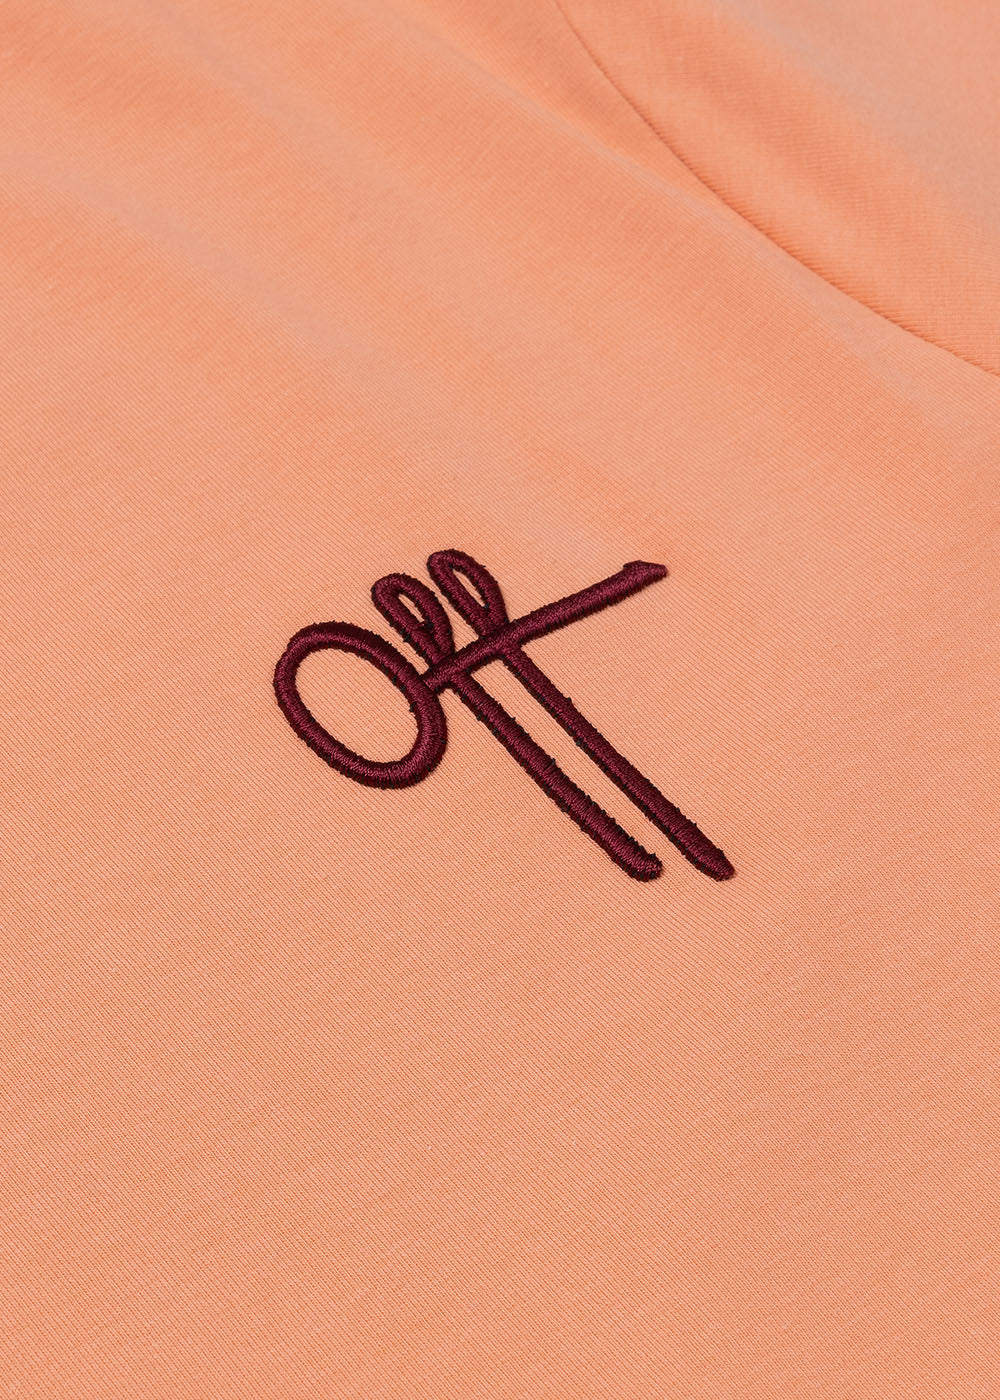 Off The Pitch Slim Fit T-shirt Outline Koraal Roze